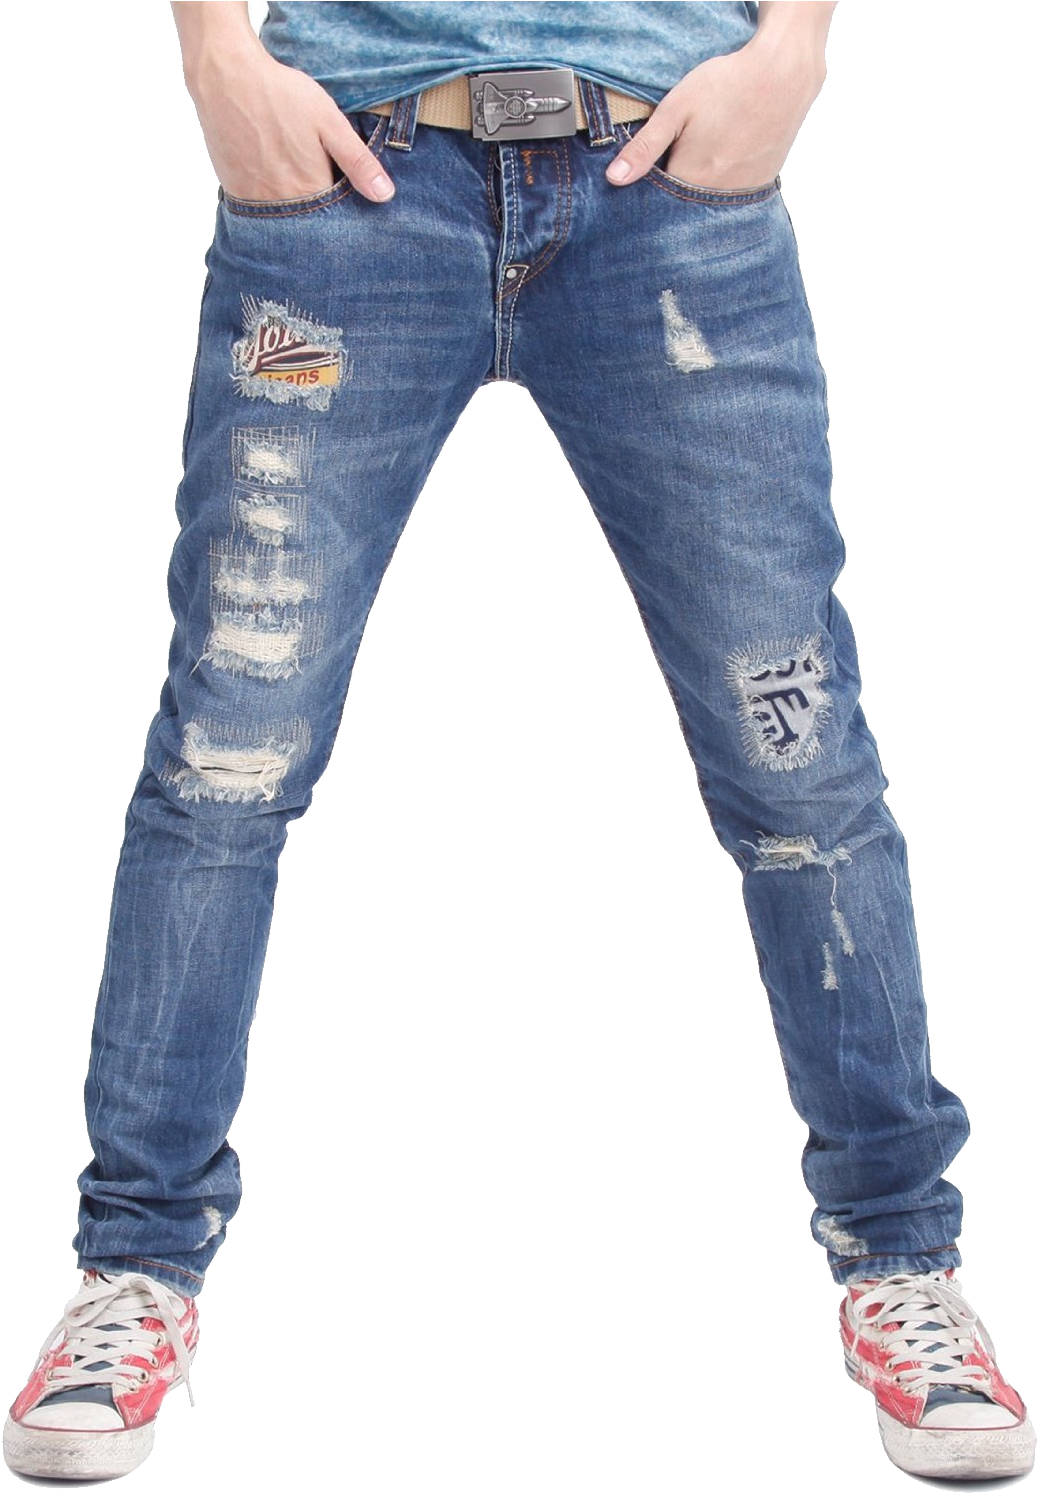 Stylish Distressed Jeans Fashion PNG image